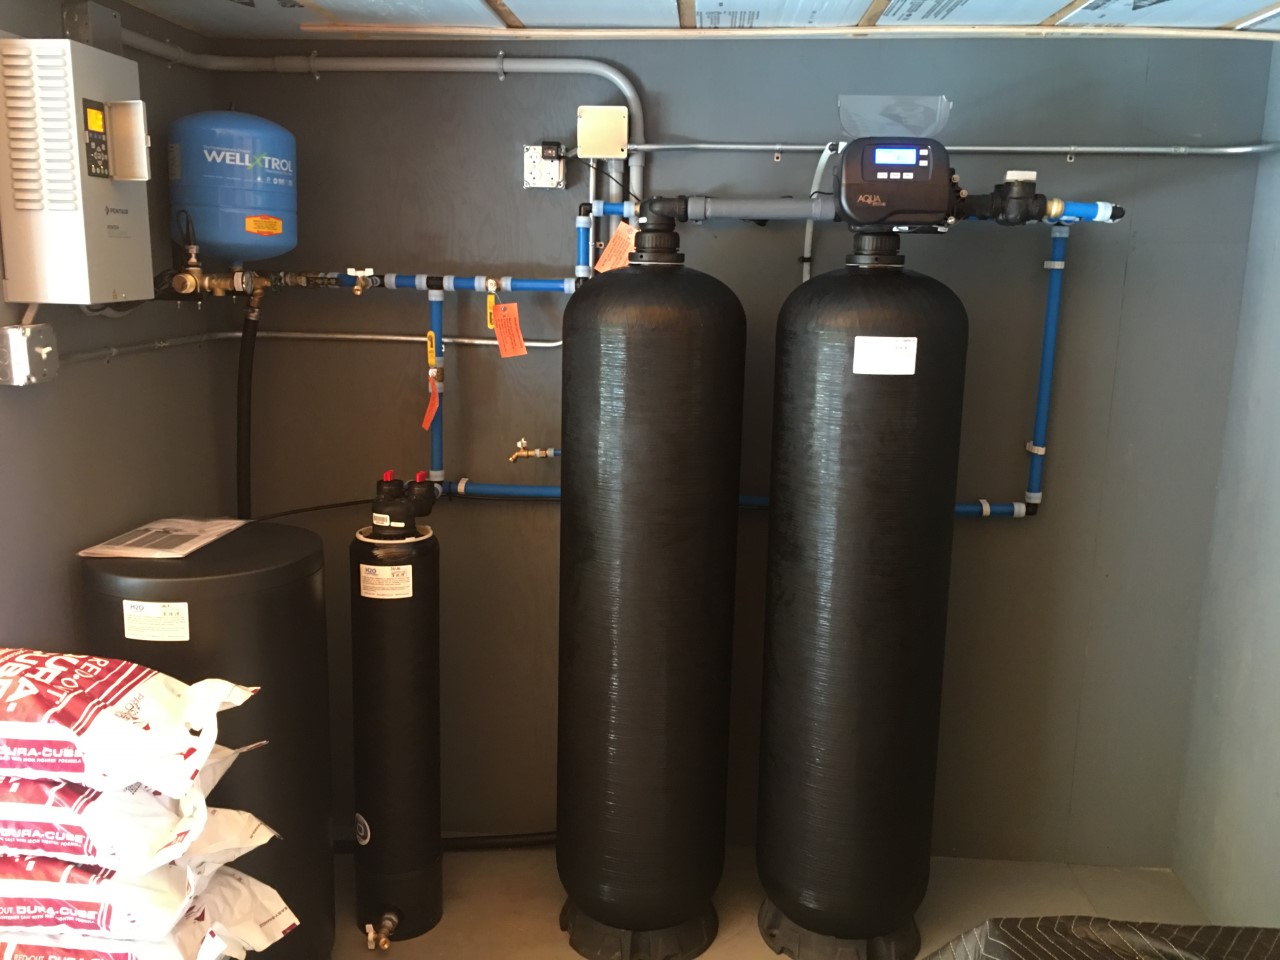 Twin 4-cubic feet Water Softeners with high-capacity sediment filter for lawn irrigation. System installed to remove high dissolved iron & sediment which was staining the landscape and clogging sprinkler heads.